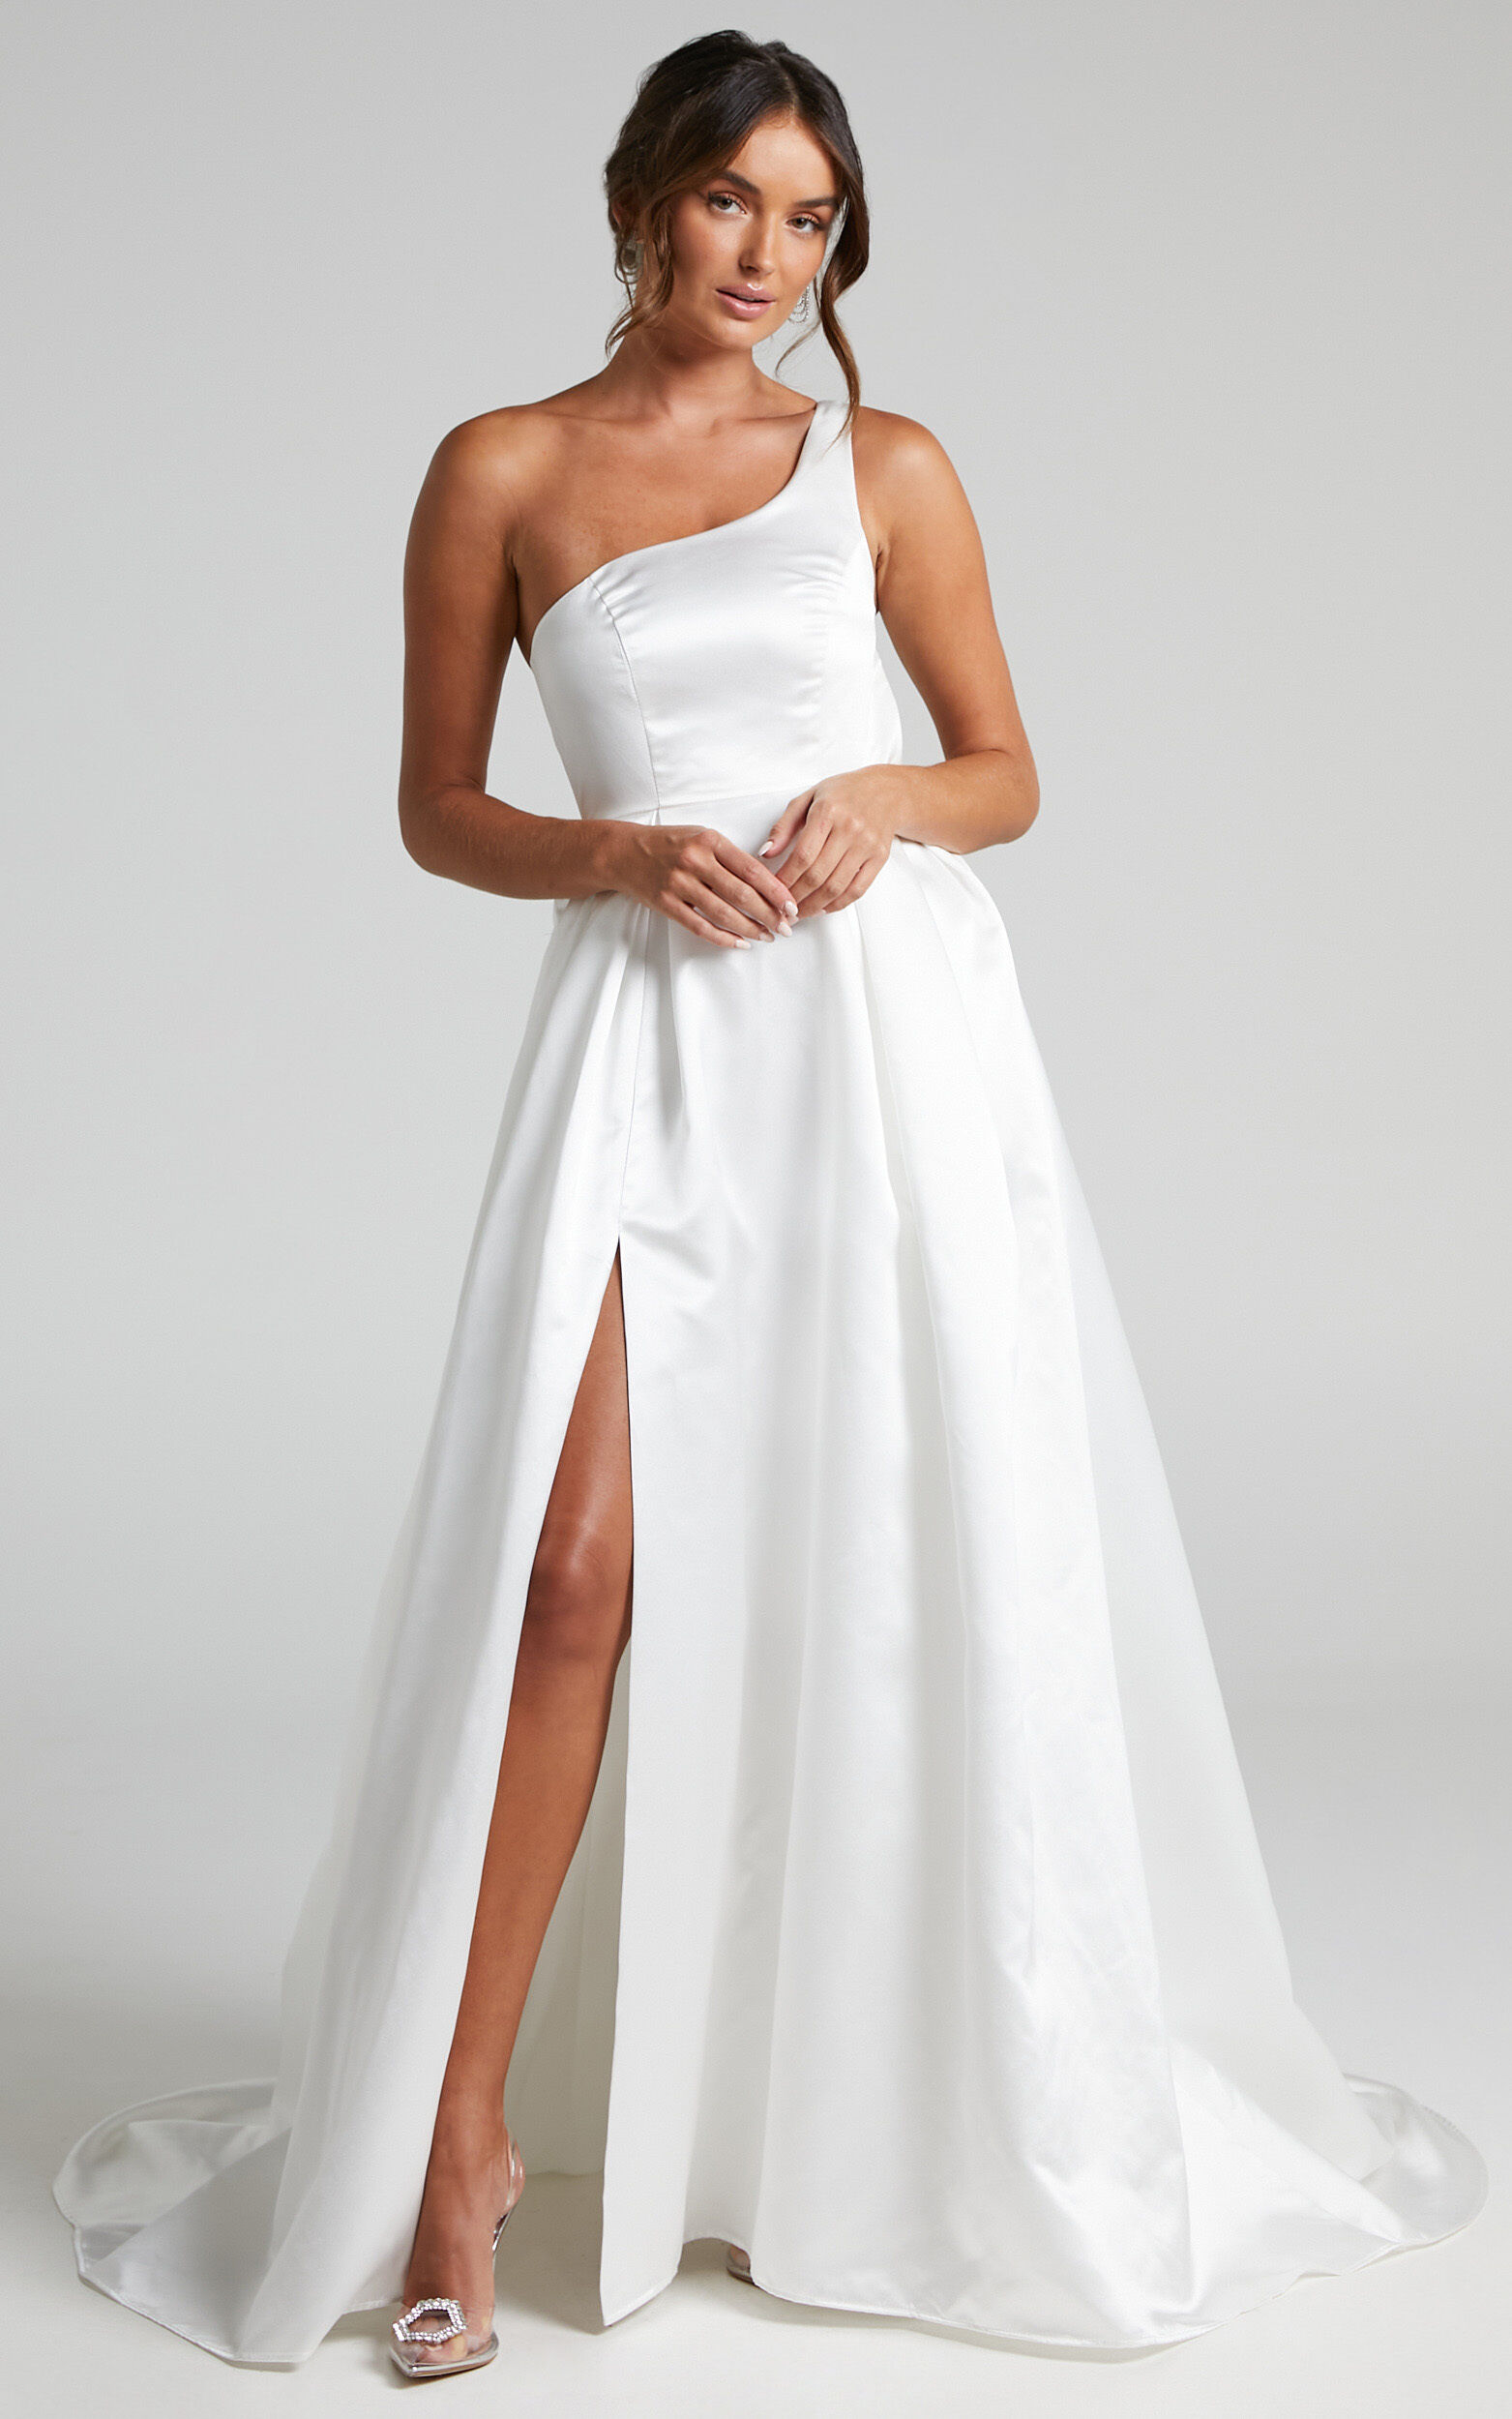 Desire Me Gown - One Shoulder Thigh Split Gown in Ivory Satin - 04, WHT1